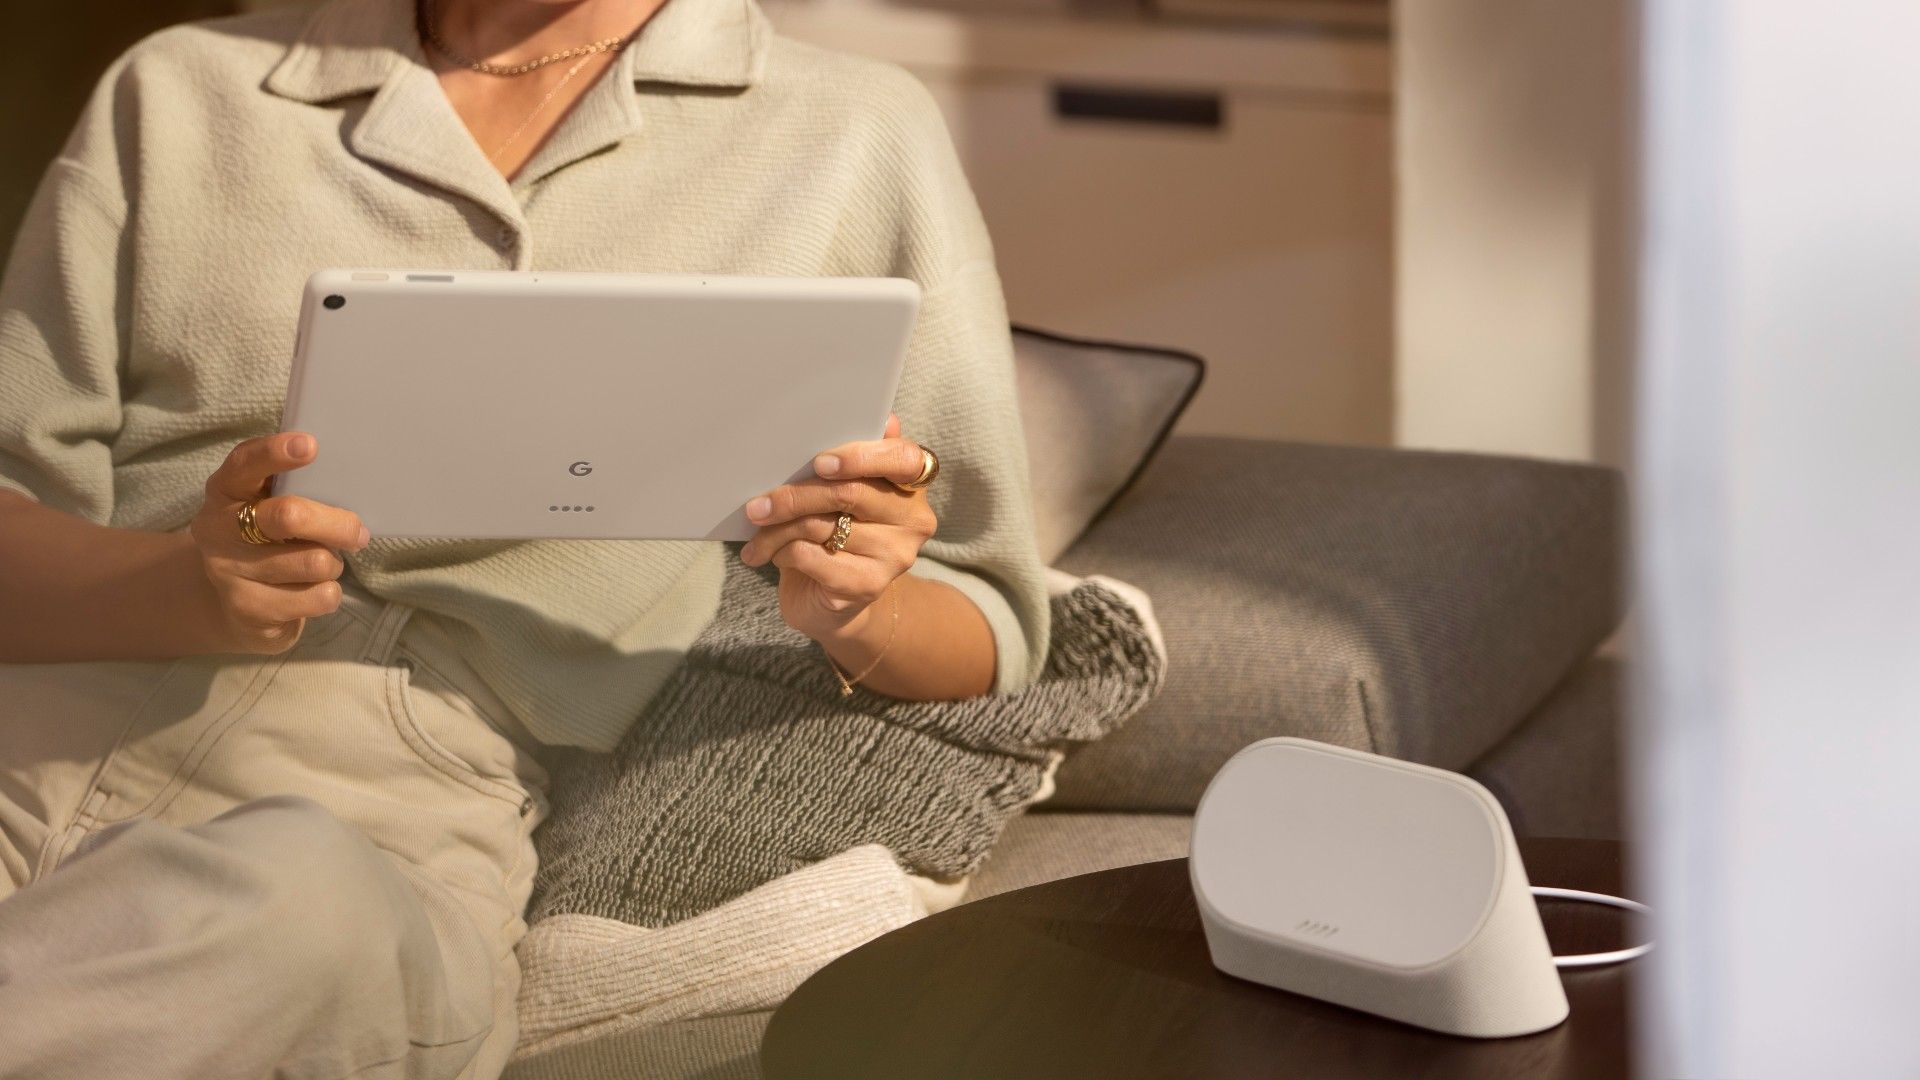 A woman holds a tablet in a neutral interior.